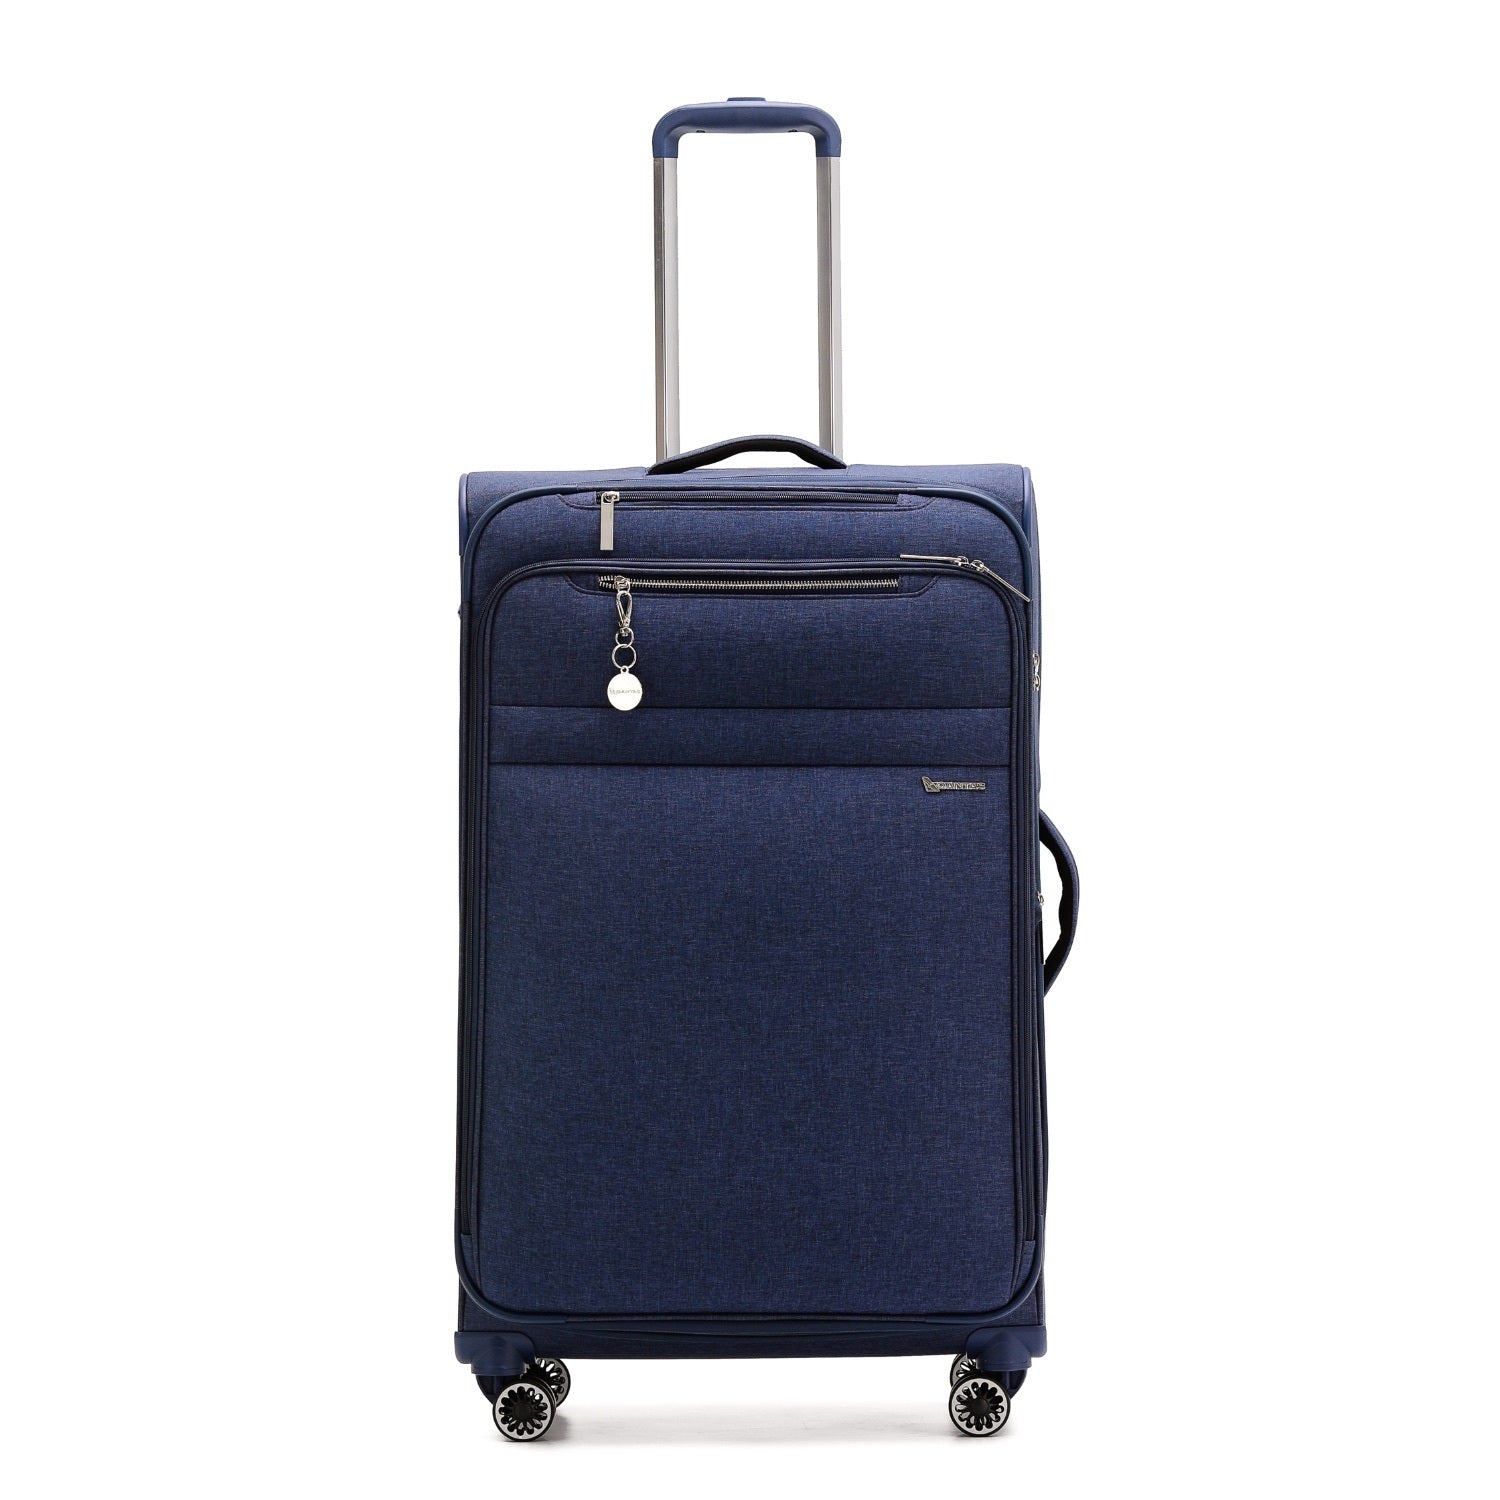 Qantas - QF400 81cm Large Adelaide Soft sided spinner - Navy-1